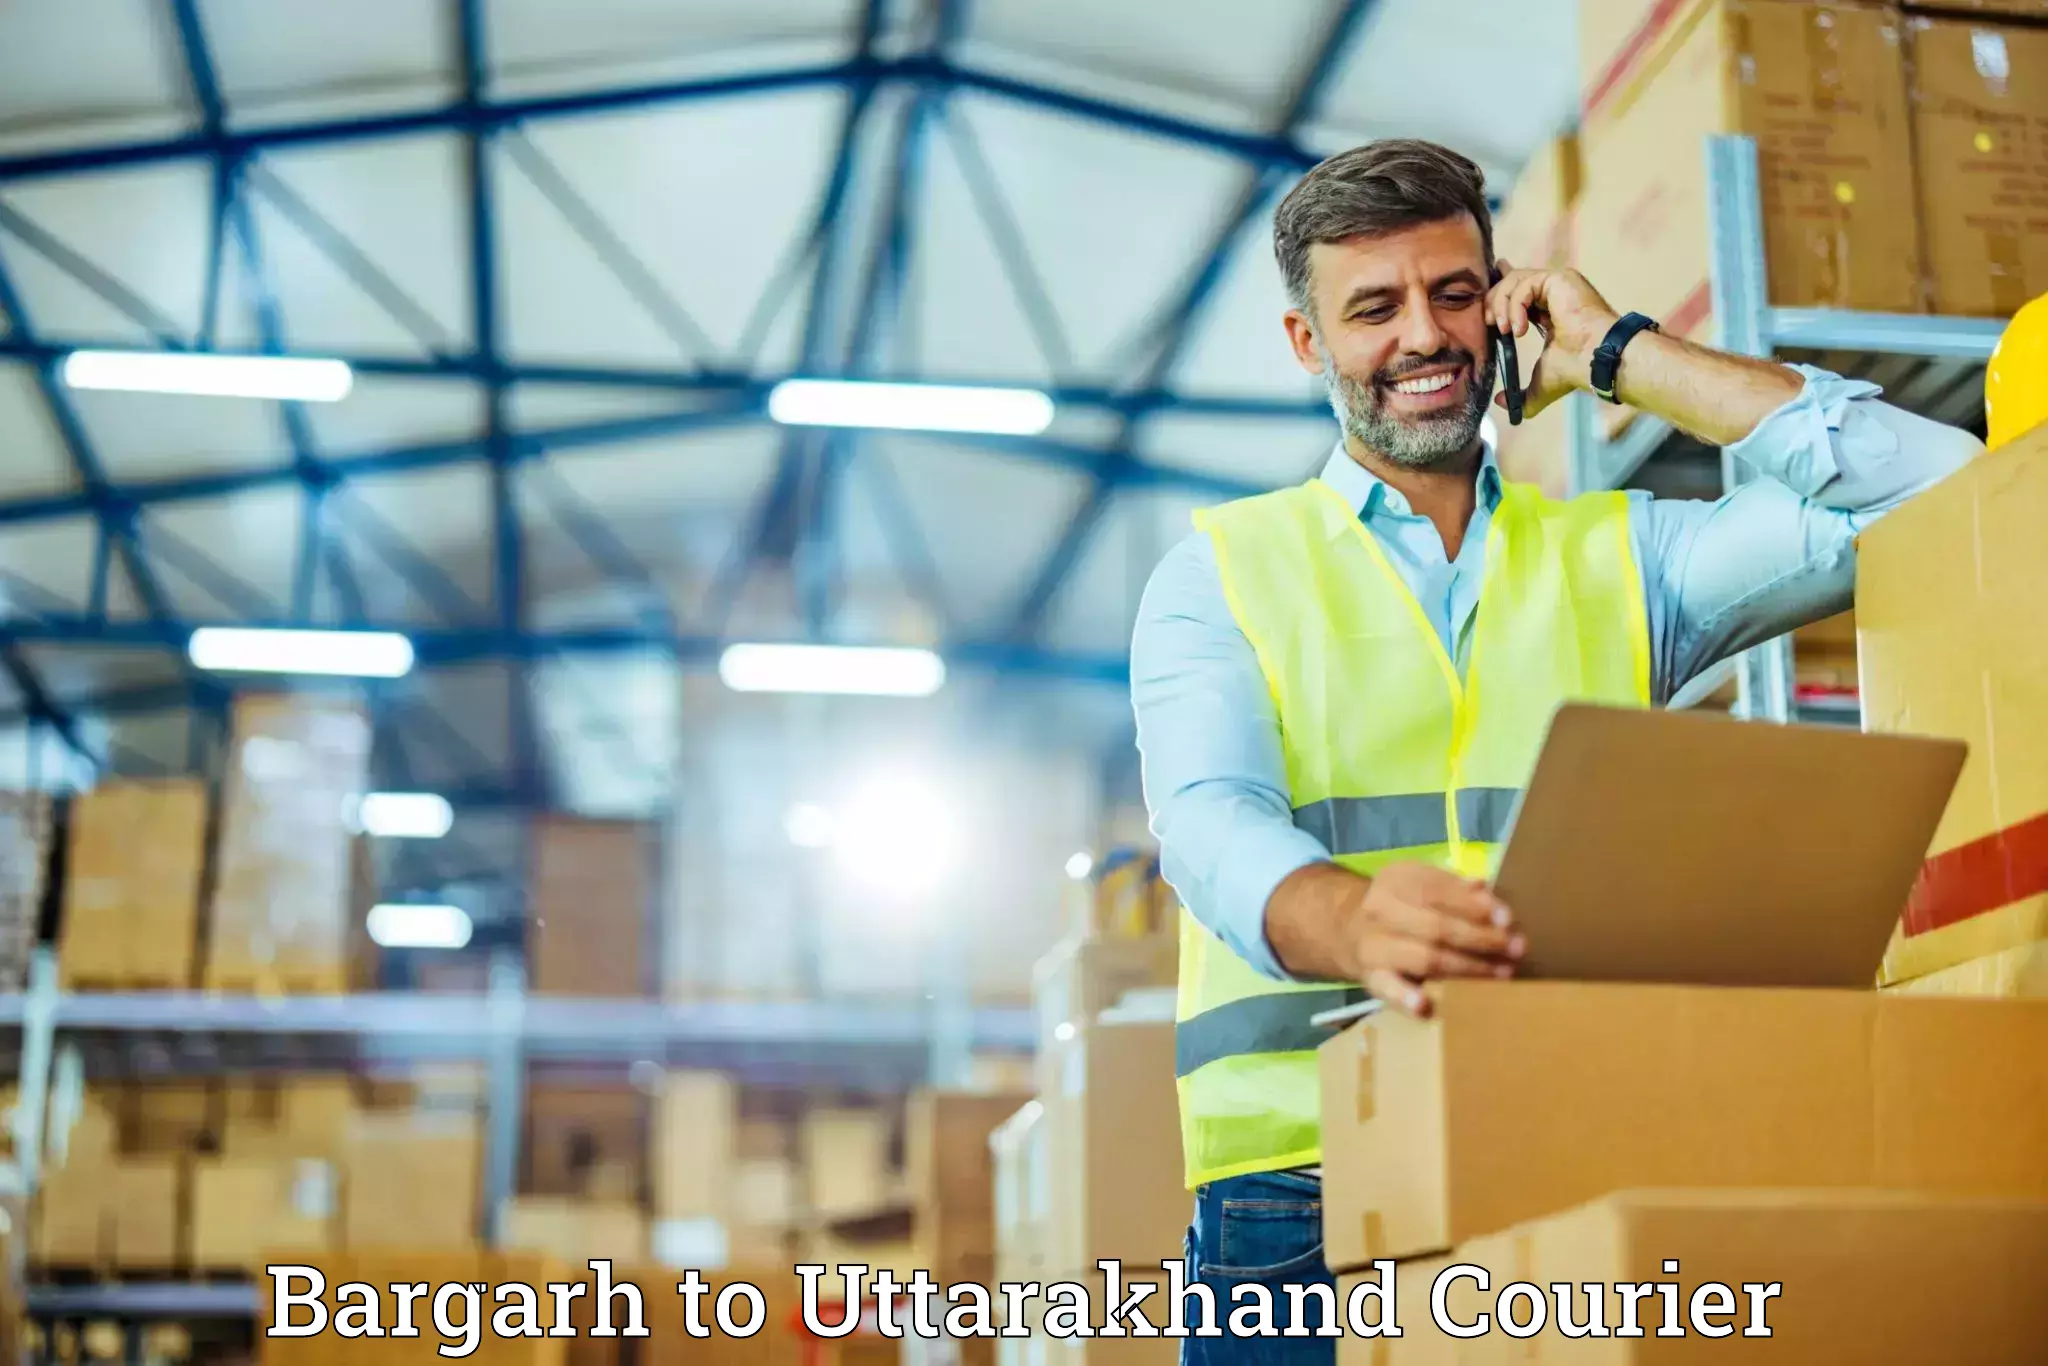 Quality moving company in Bargarh to Gopeshwar